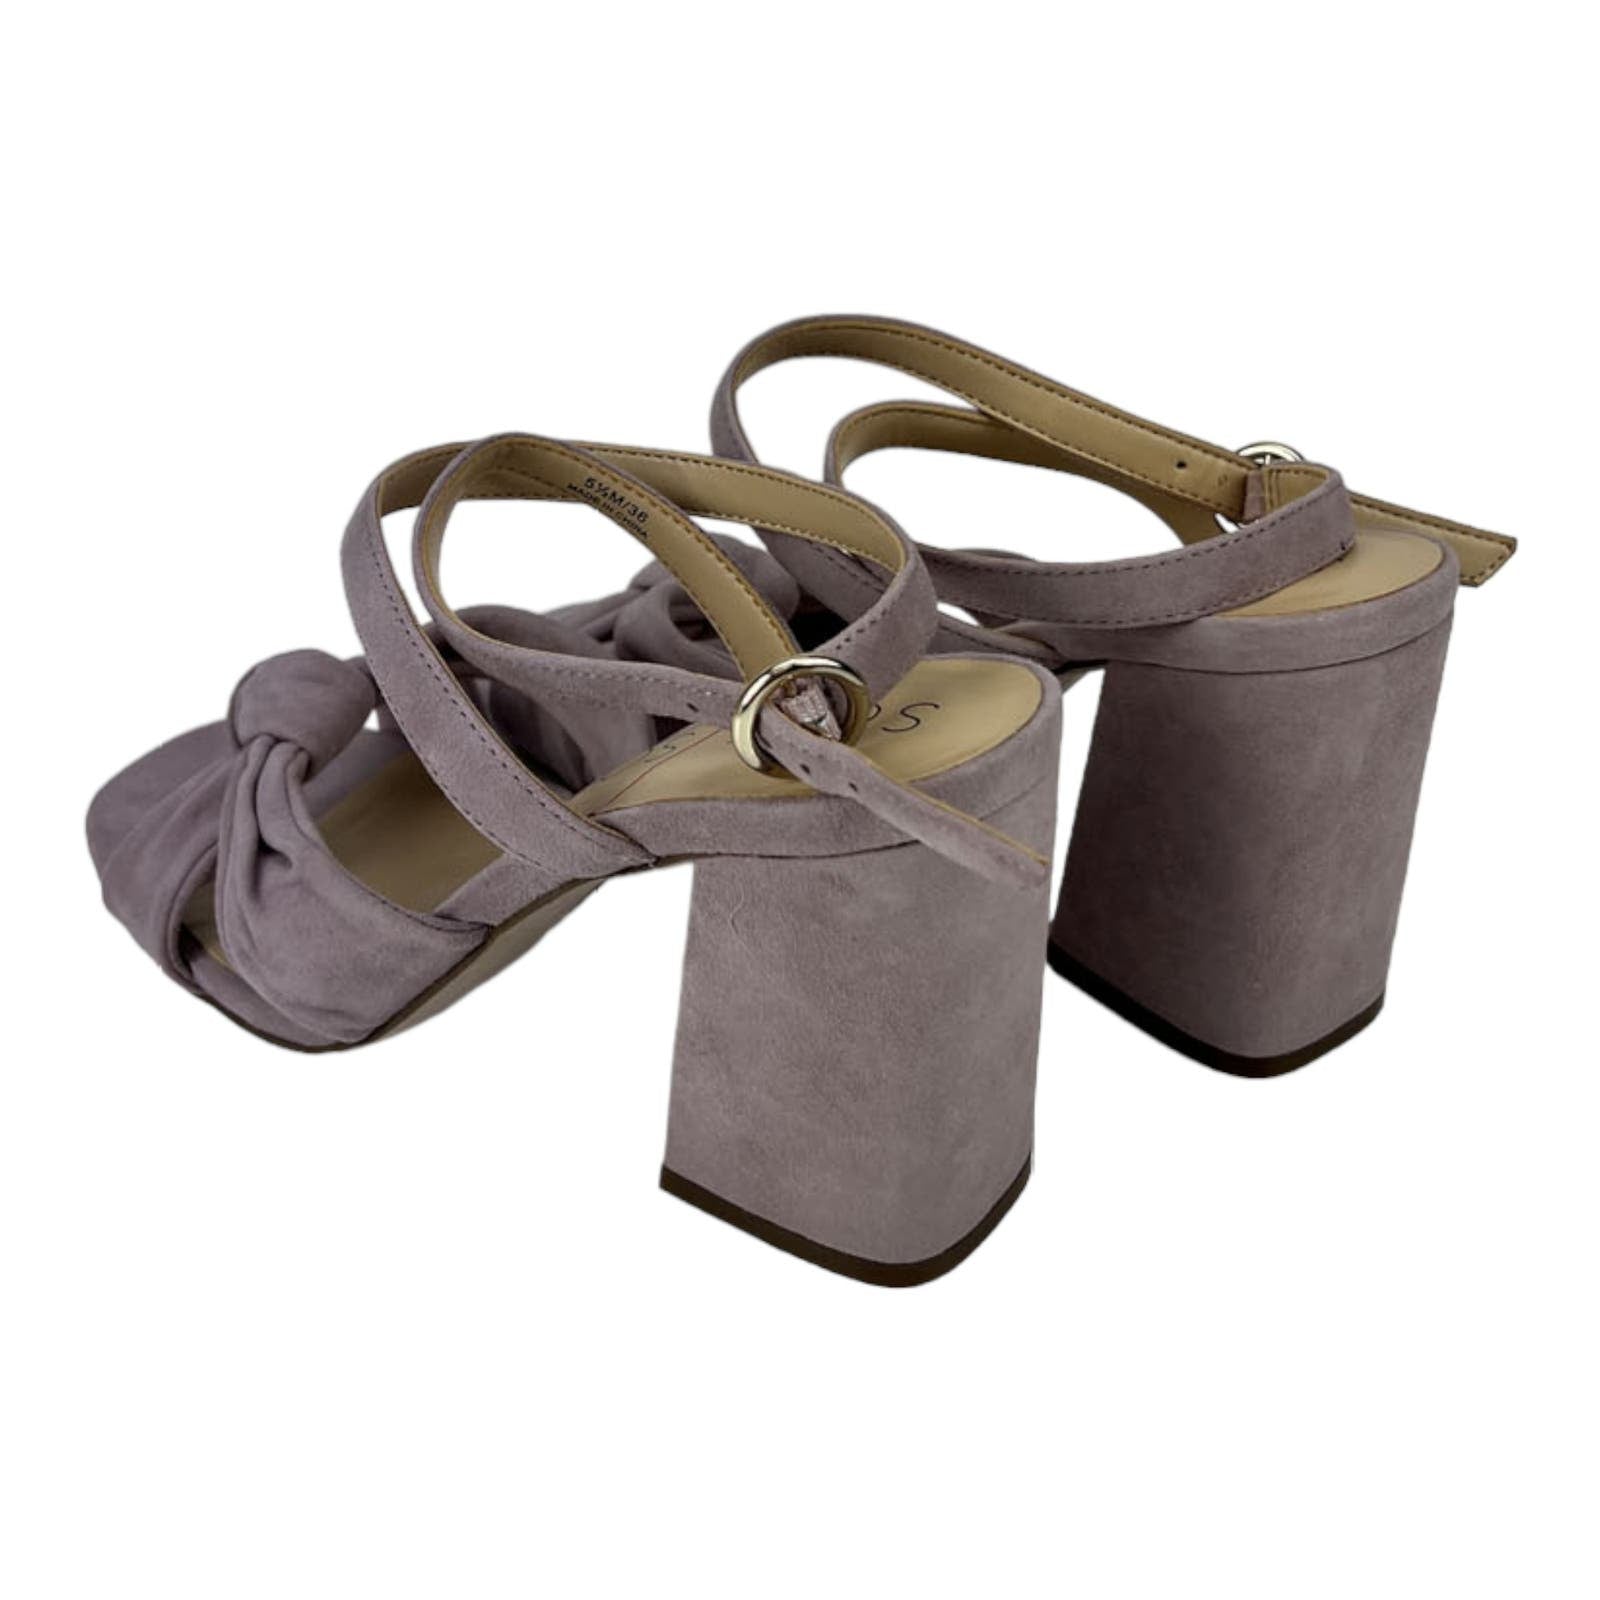 Sole Society Women US 5.5 Lavender Suede Ankle Strap Sandals